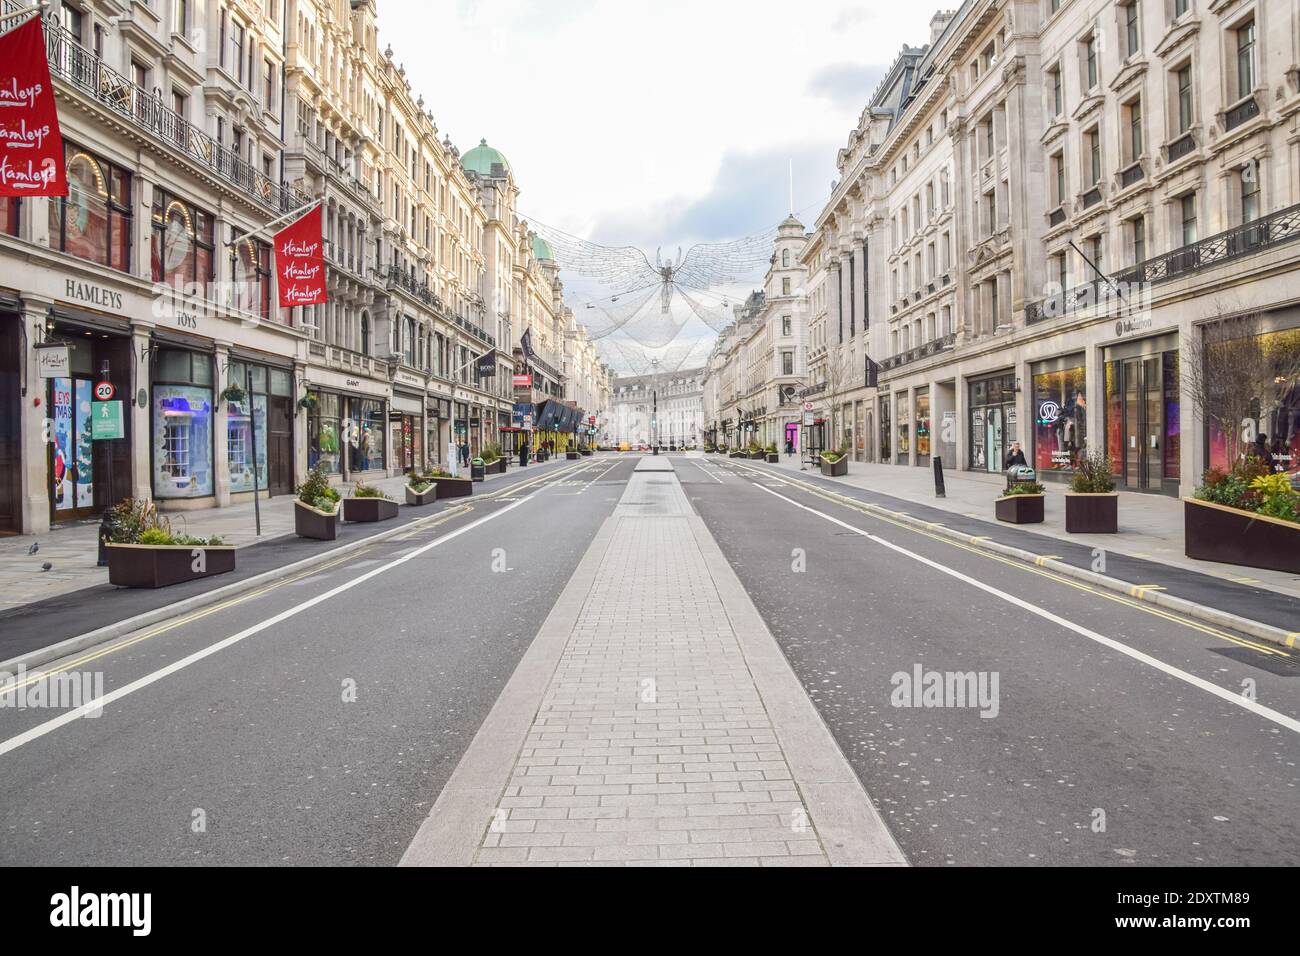 A view of a deserted Regent Street, as shops and businesses close once again. London has been placed under Tier 4 restrictions as cases surge and new strains of COVID-19 emerge in England. Stock Photo